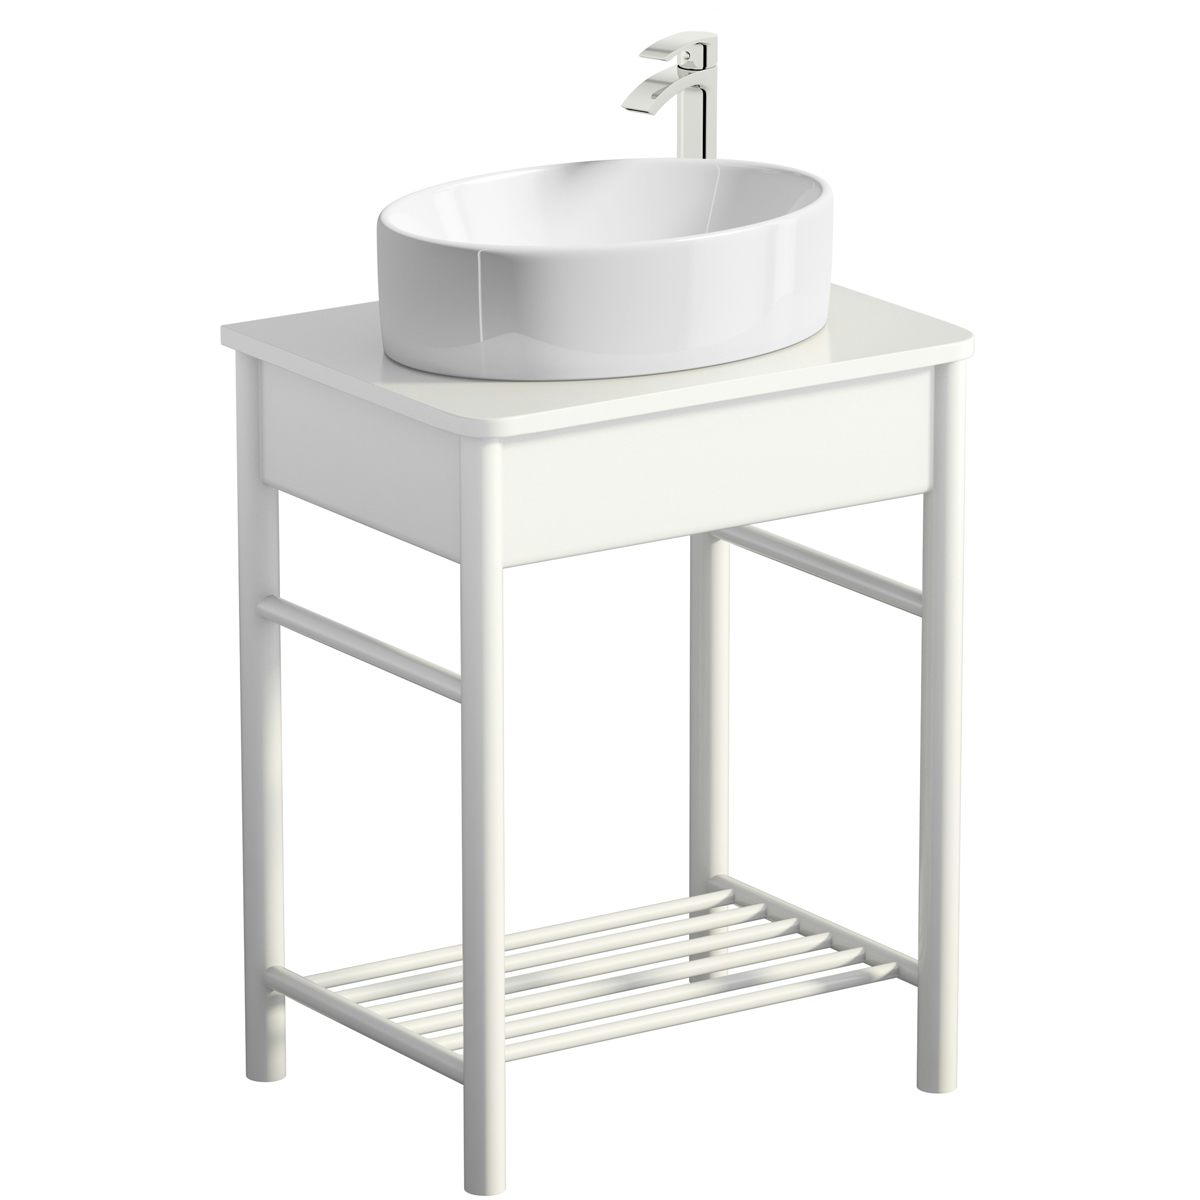 Mode South Bank white washstand and top 600mm with Hardy countertop basin, tap and waste